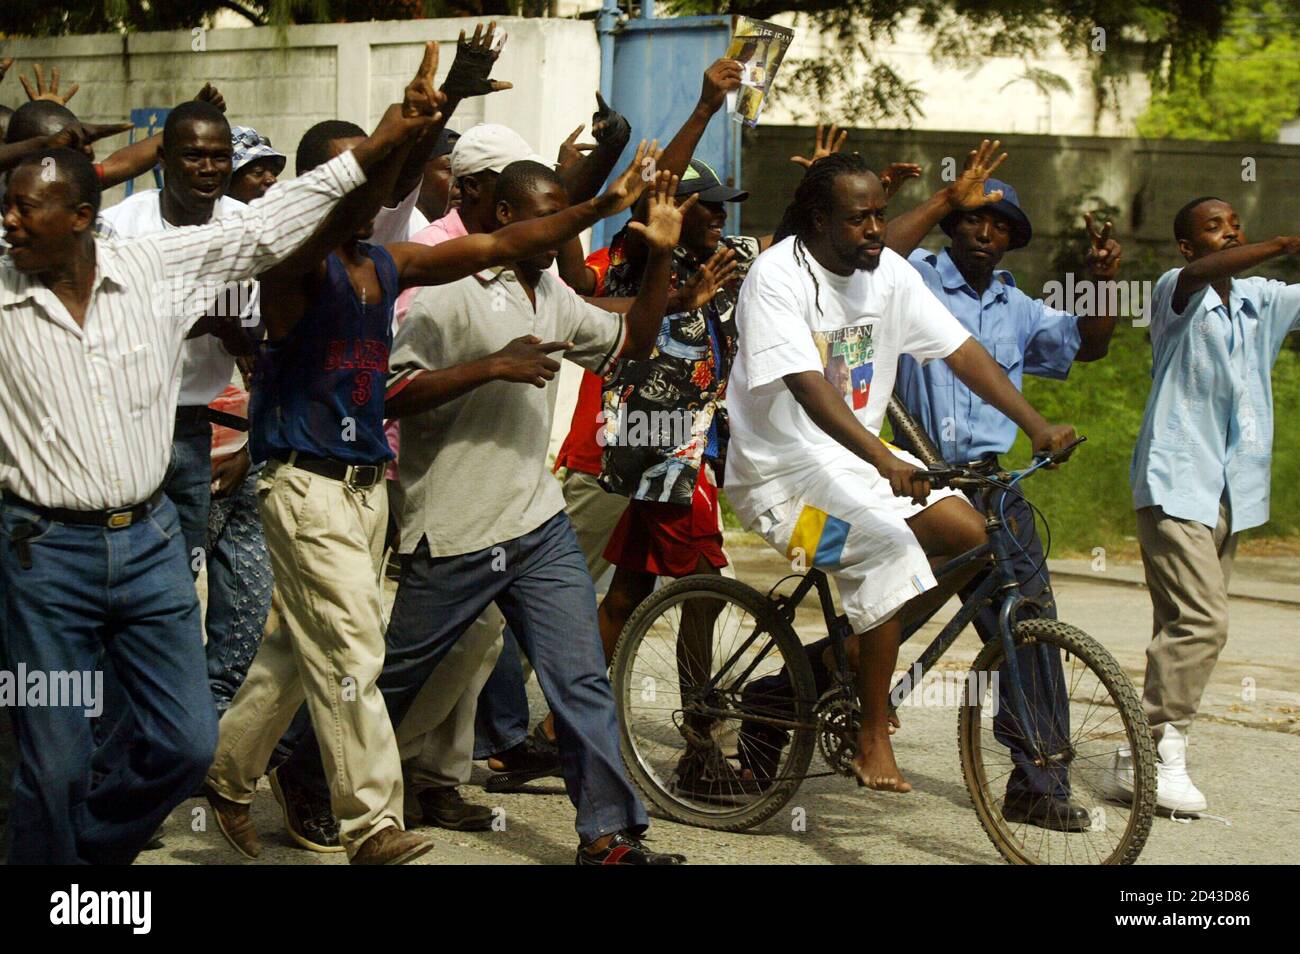 Haitian-American rap star and Grammy Award-winner Wyclef Jean, (on bike)  formerly of The Fugees, rides a bicycle in the yard of the World Food  Program (WFP) warehouse in Port-au-Prince, Haiti, on October